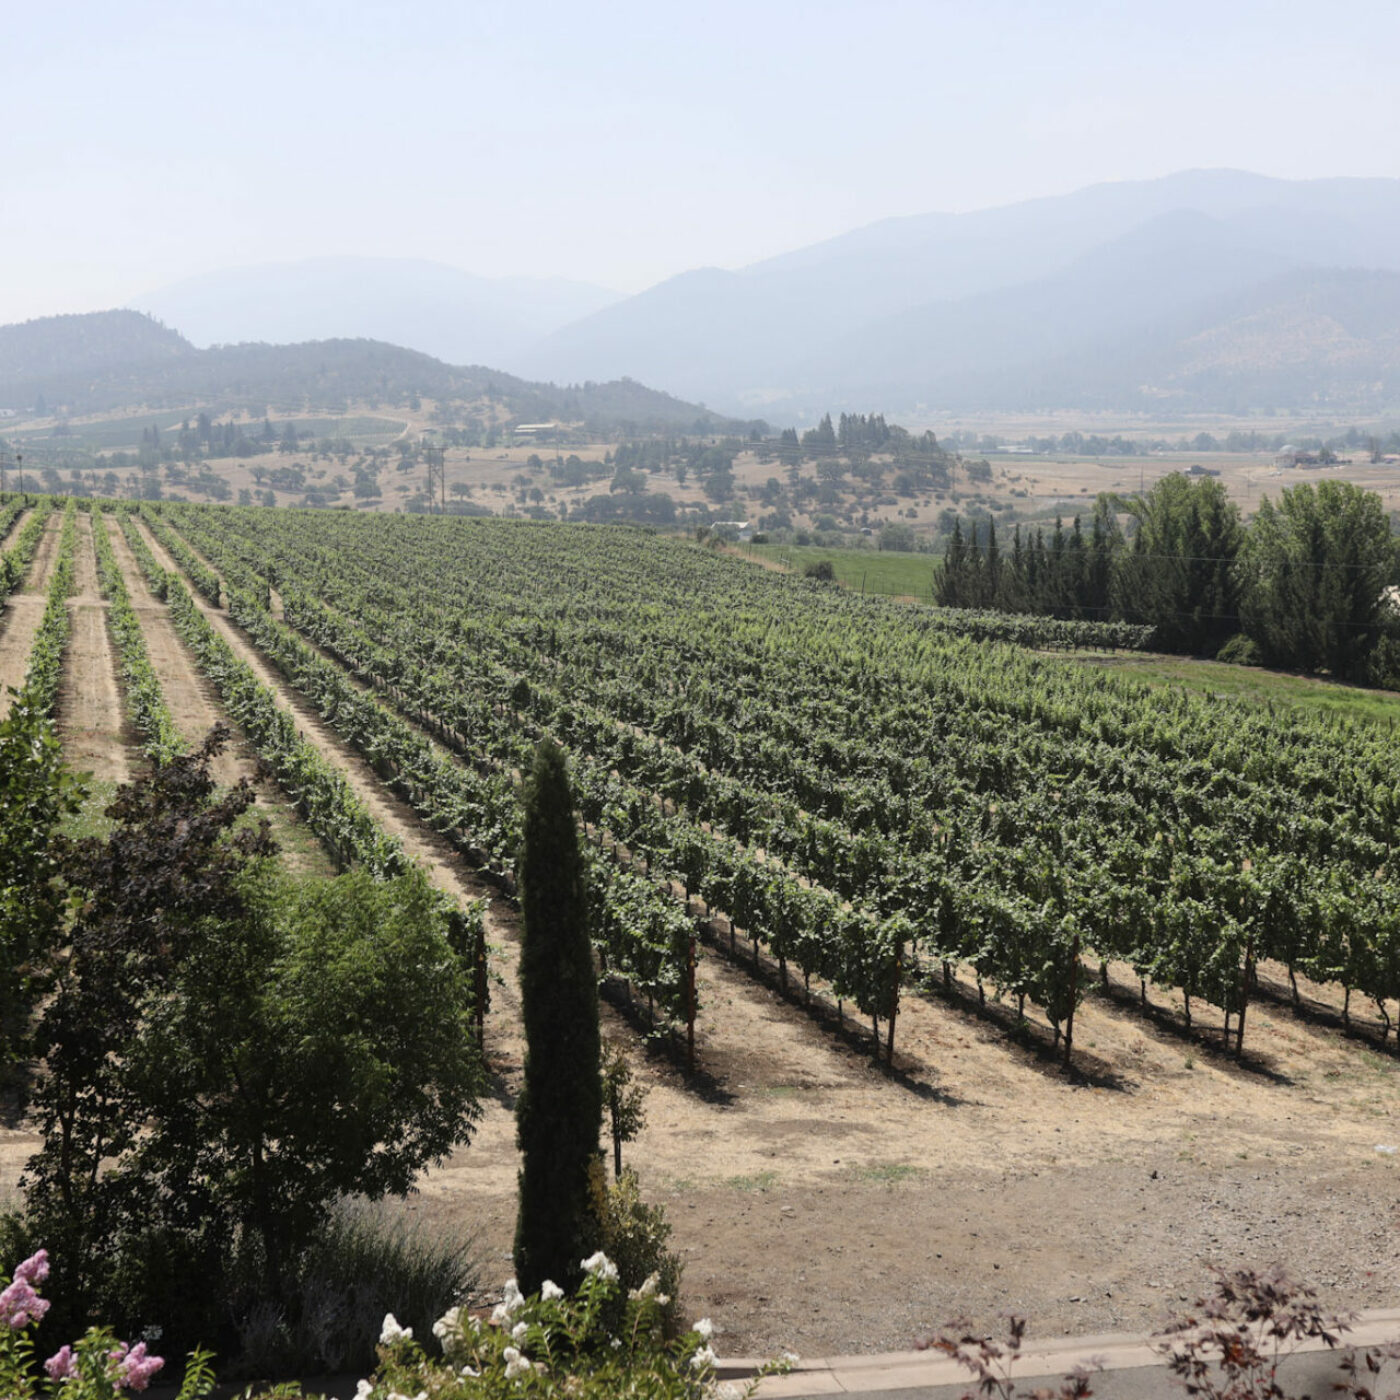 Southern Oregon wineries and vineyards - Rogue Valley wineries outside Ashland